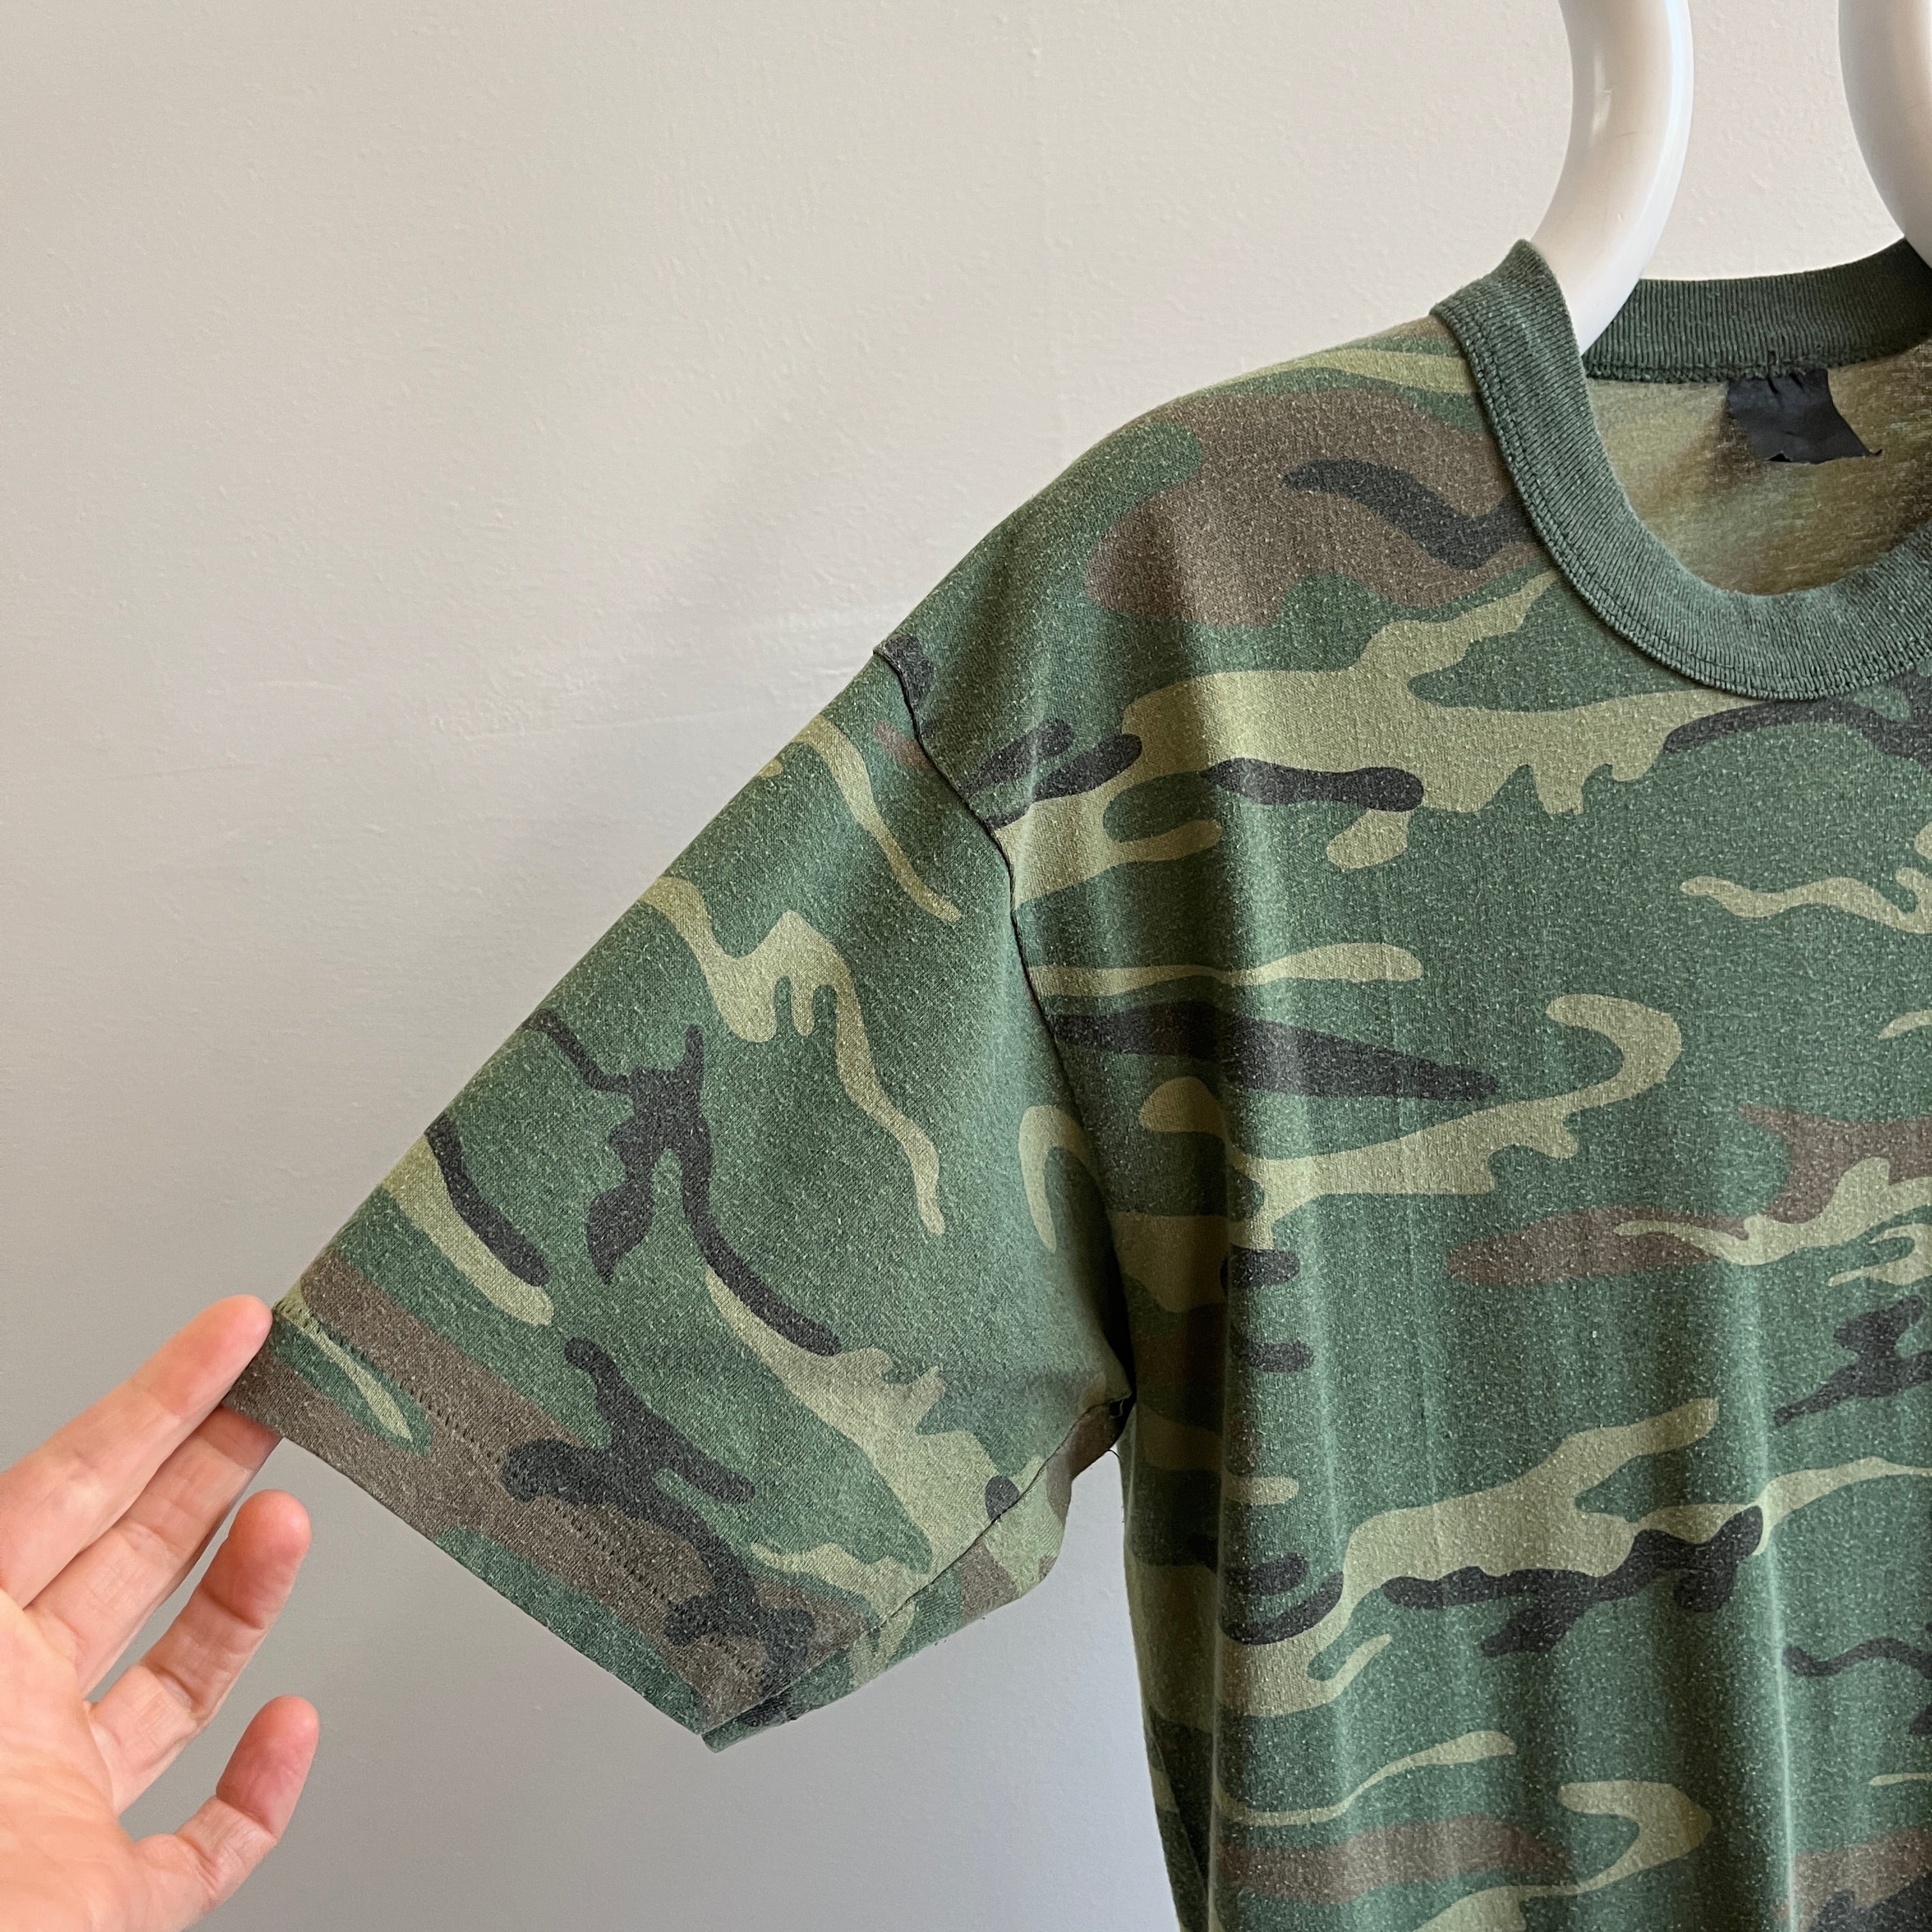 1990s Tri Color Camo T-Shirt with Rolled Collar